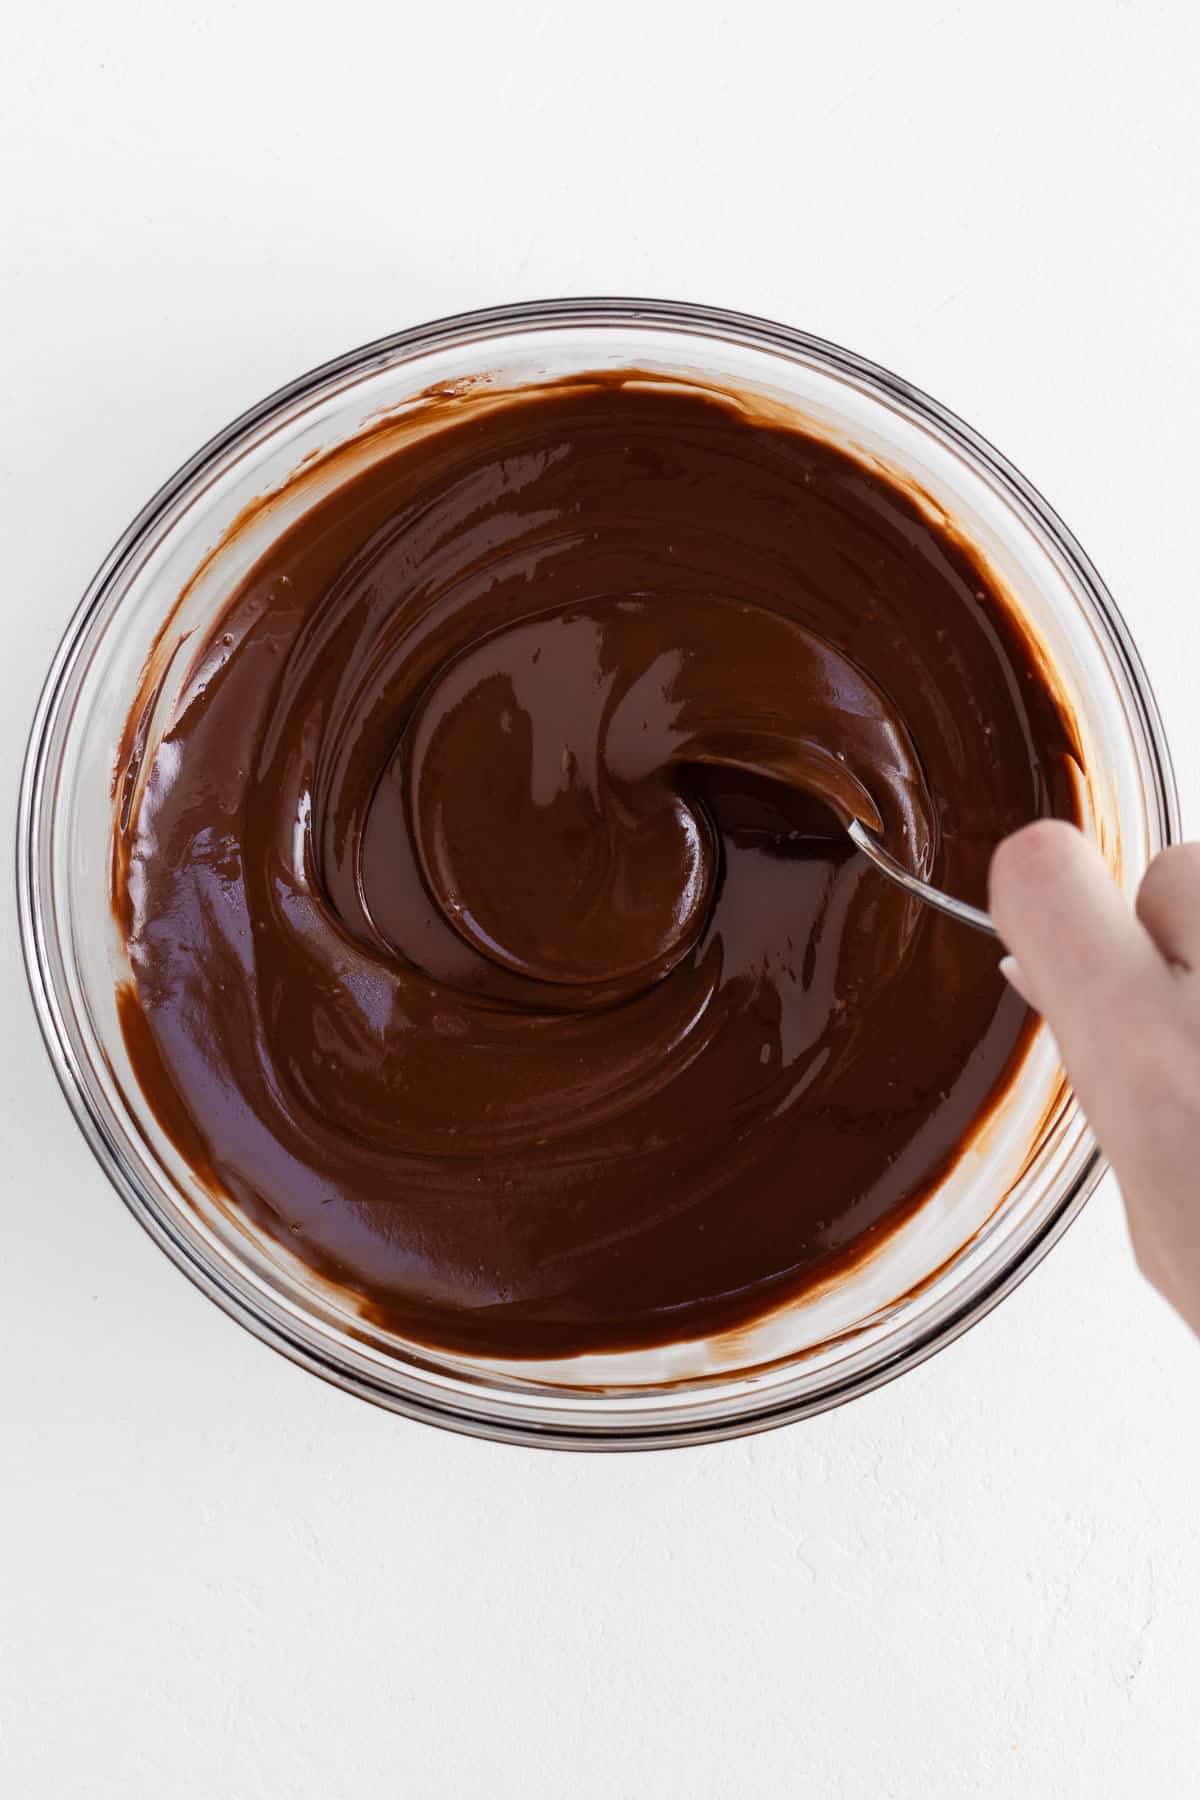 a hand mixing melted chocolate in a large glass bowl